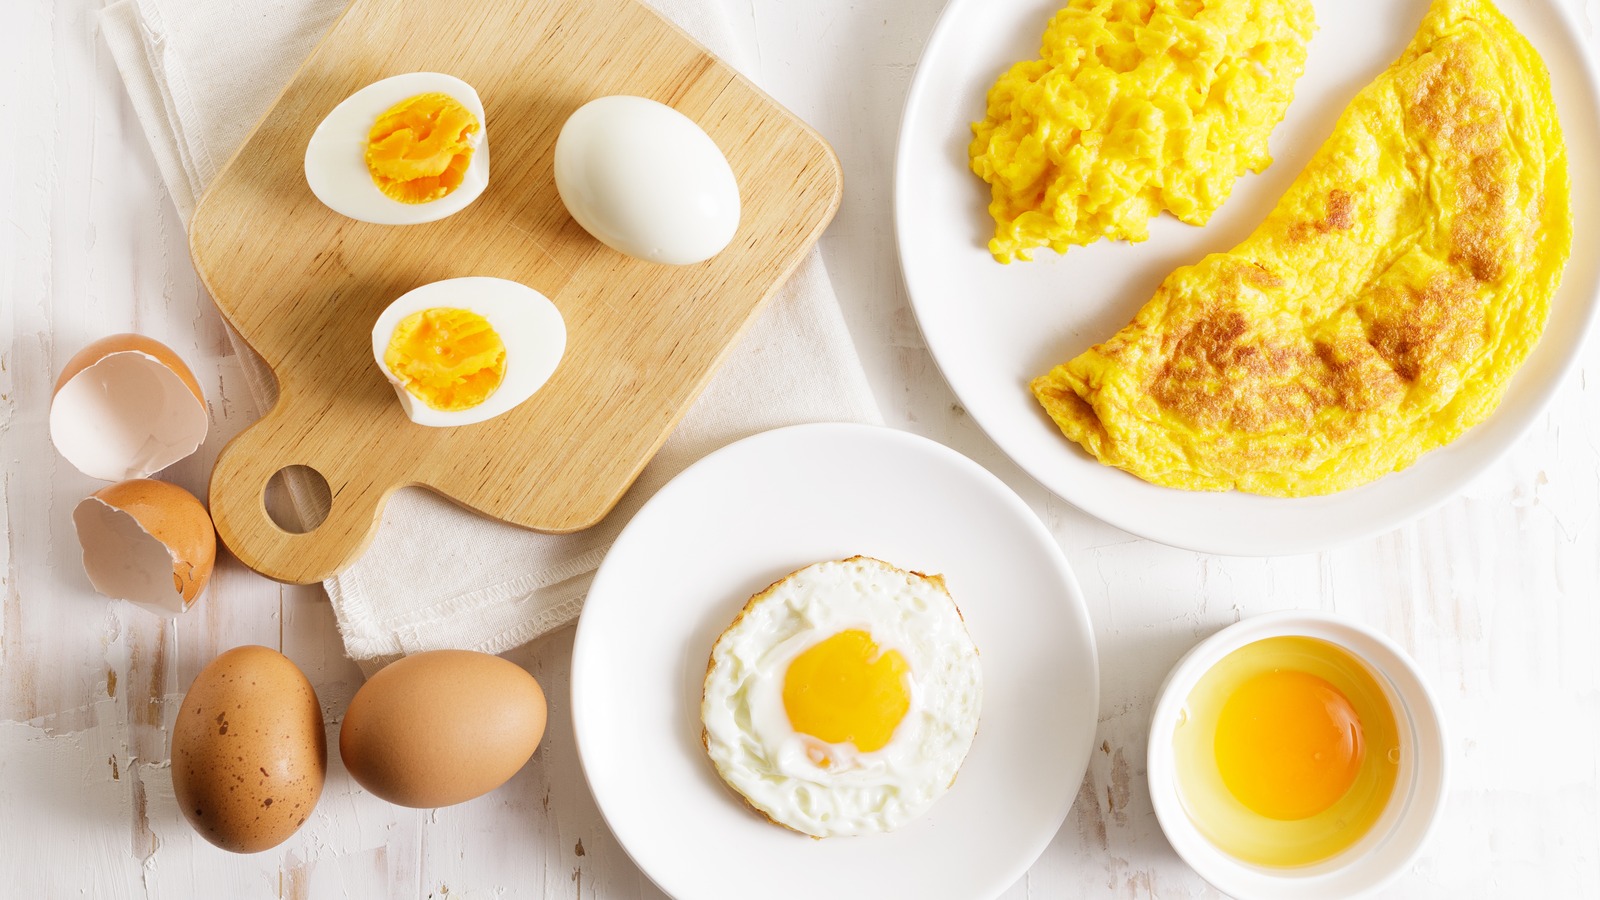 10 Creative EGG Molds For Fried & Boiled Eggs That Will Make You